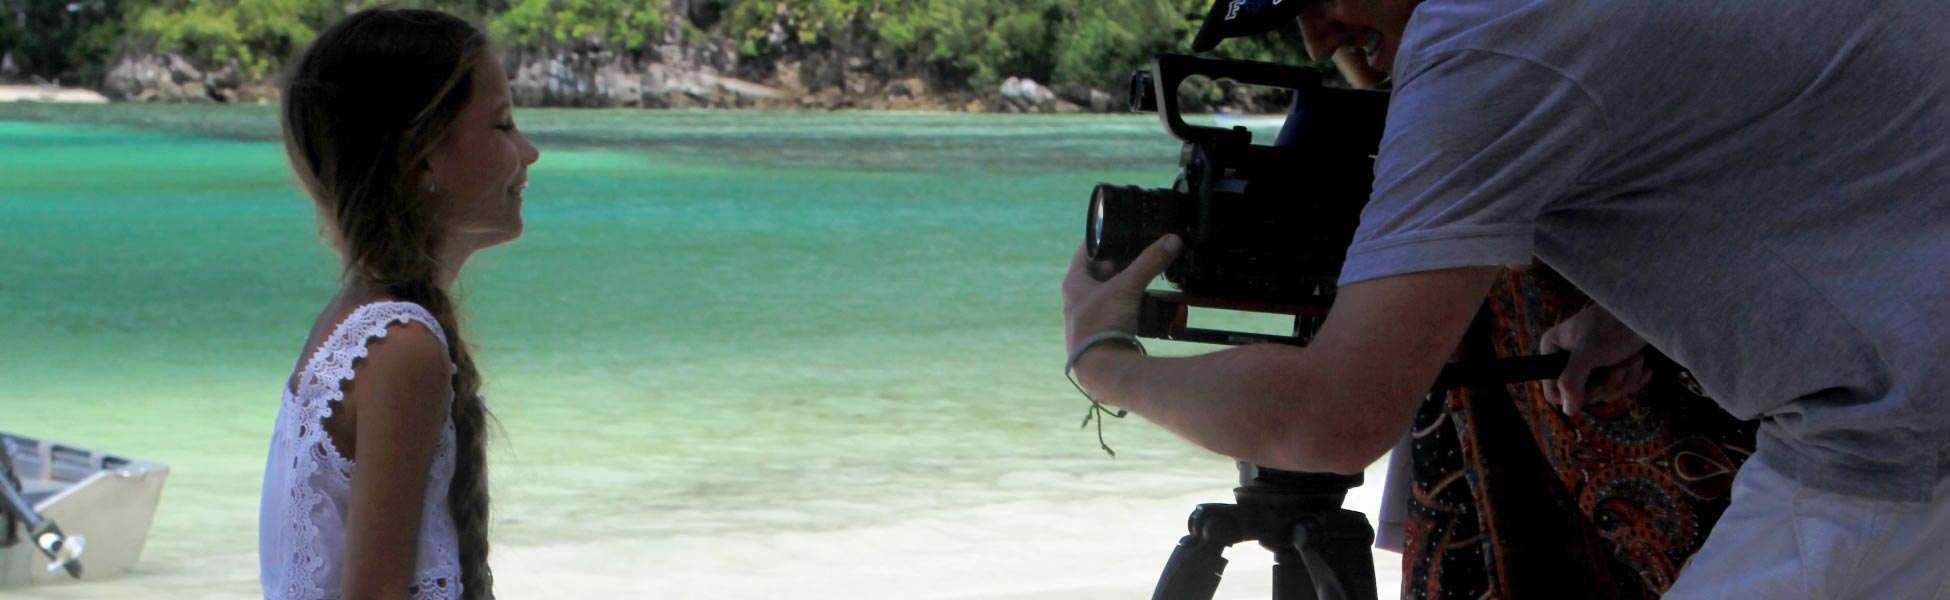 music video consultancy services in seychelles, video consultancy services in seychelles, consultancy services in seychelles